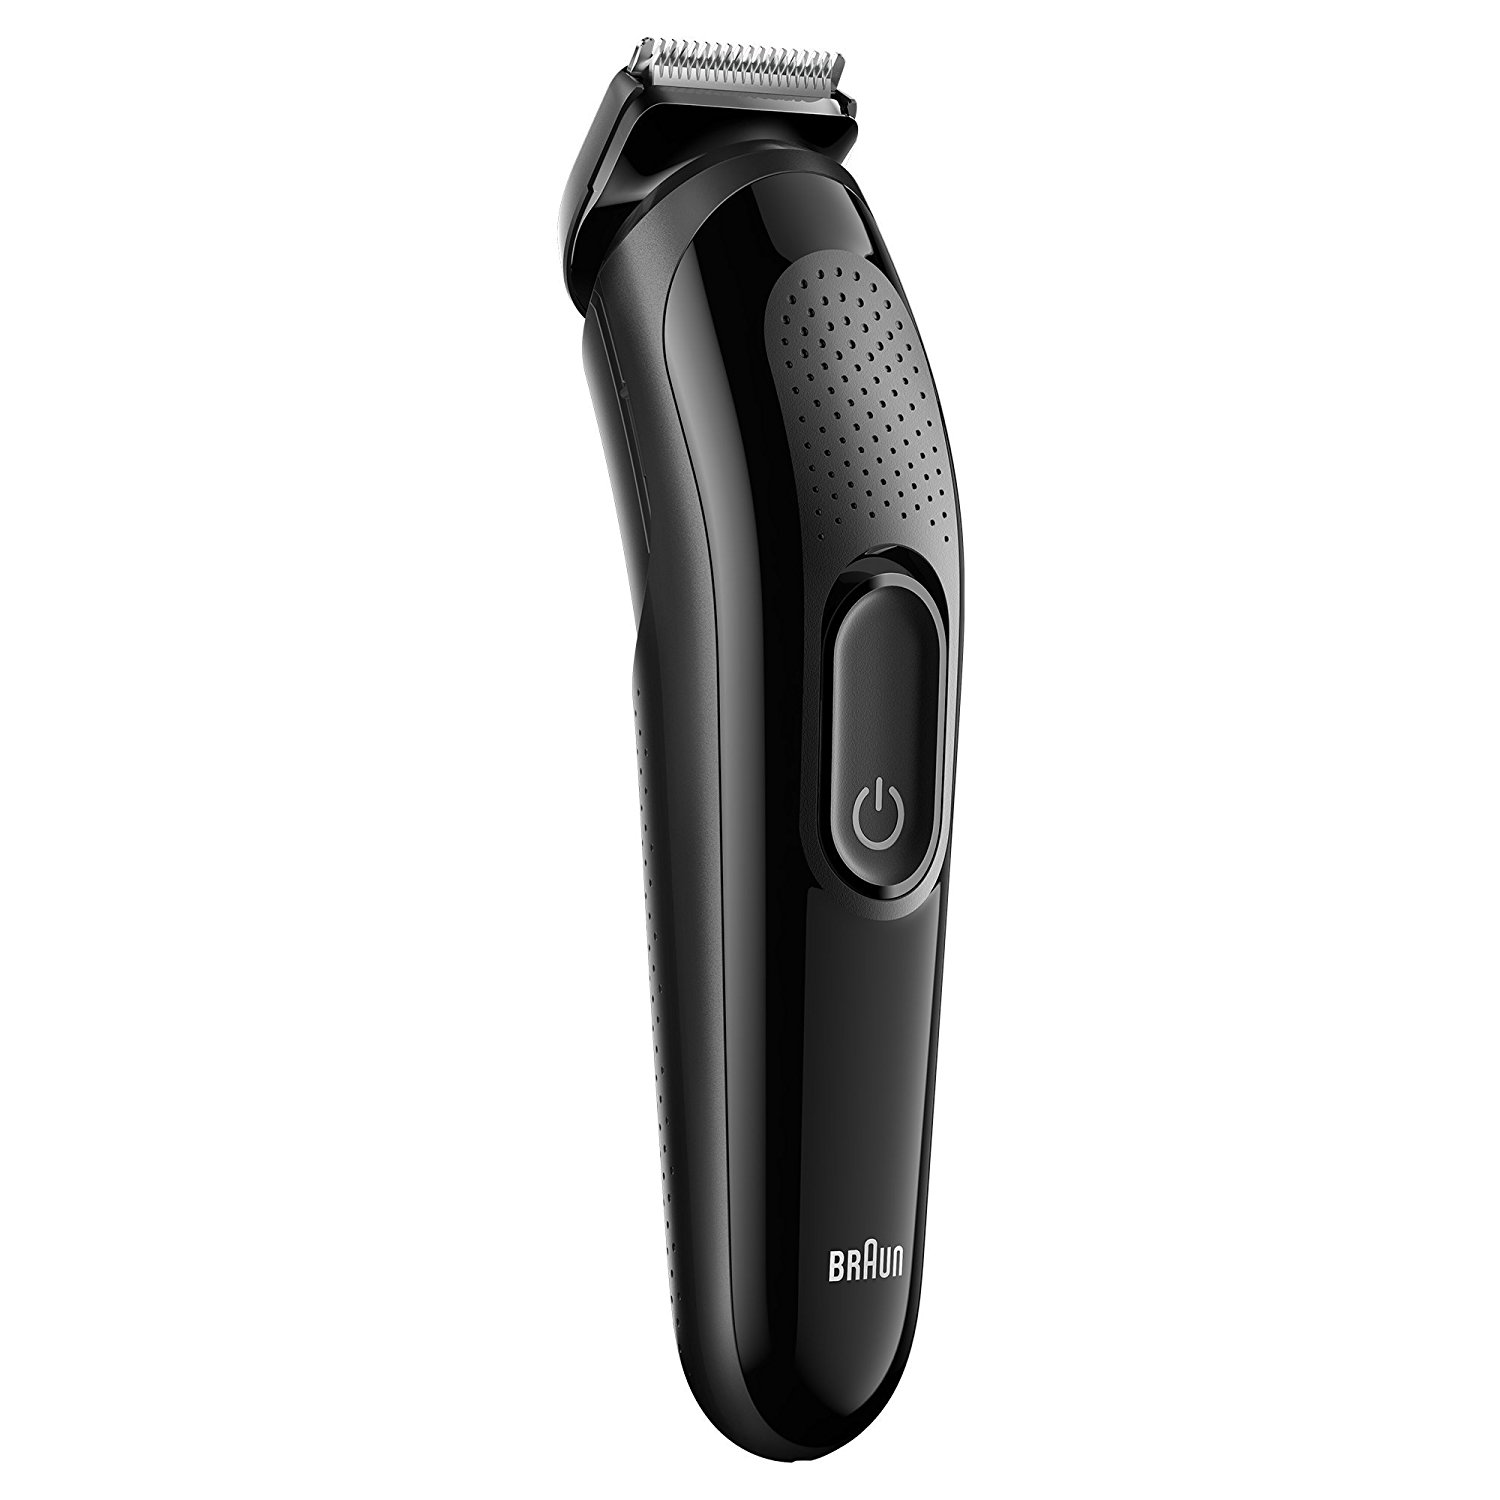 Braun MGK3020 6 in one beard and hair trimmer